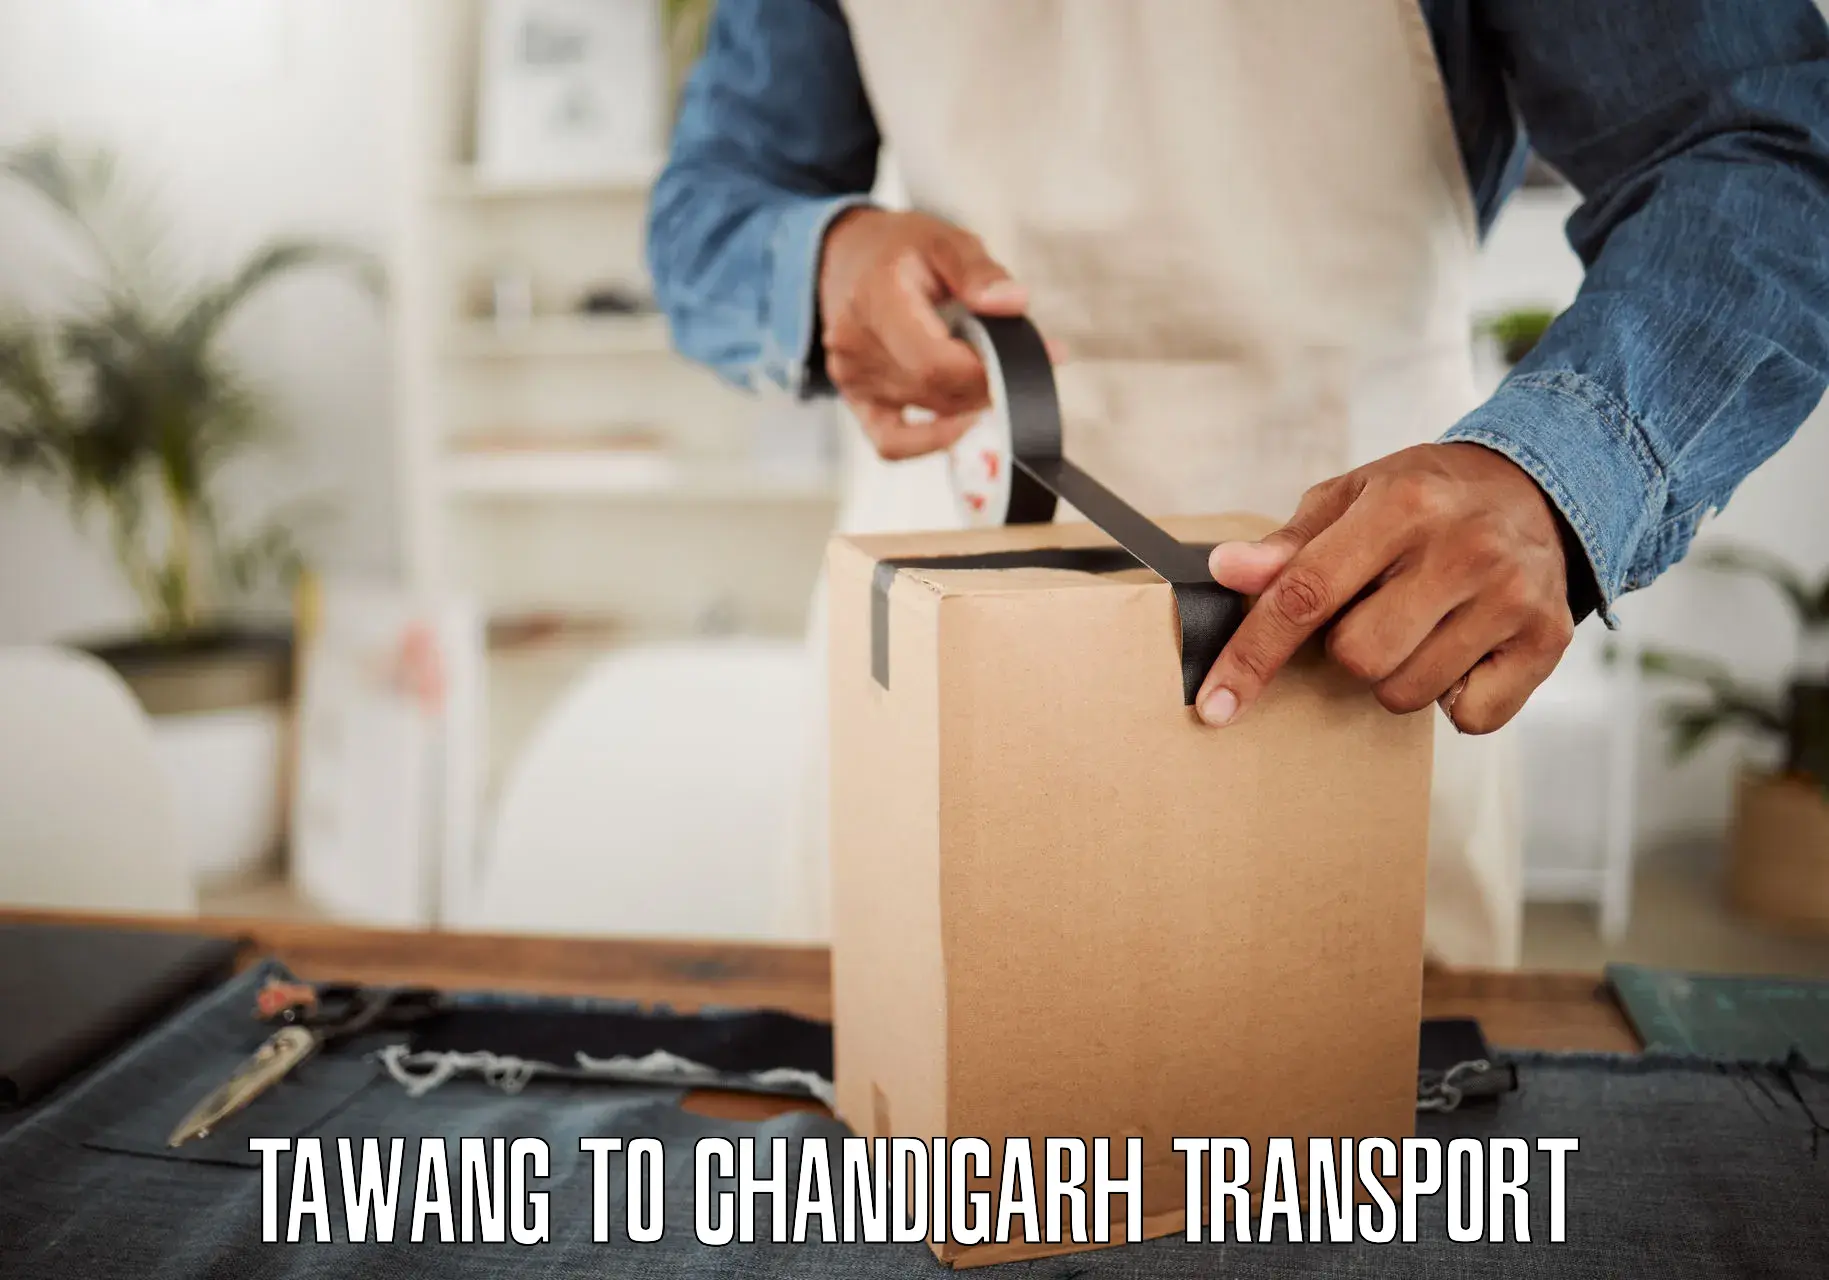 Commercial transport service Tawang to Chandigarh